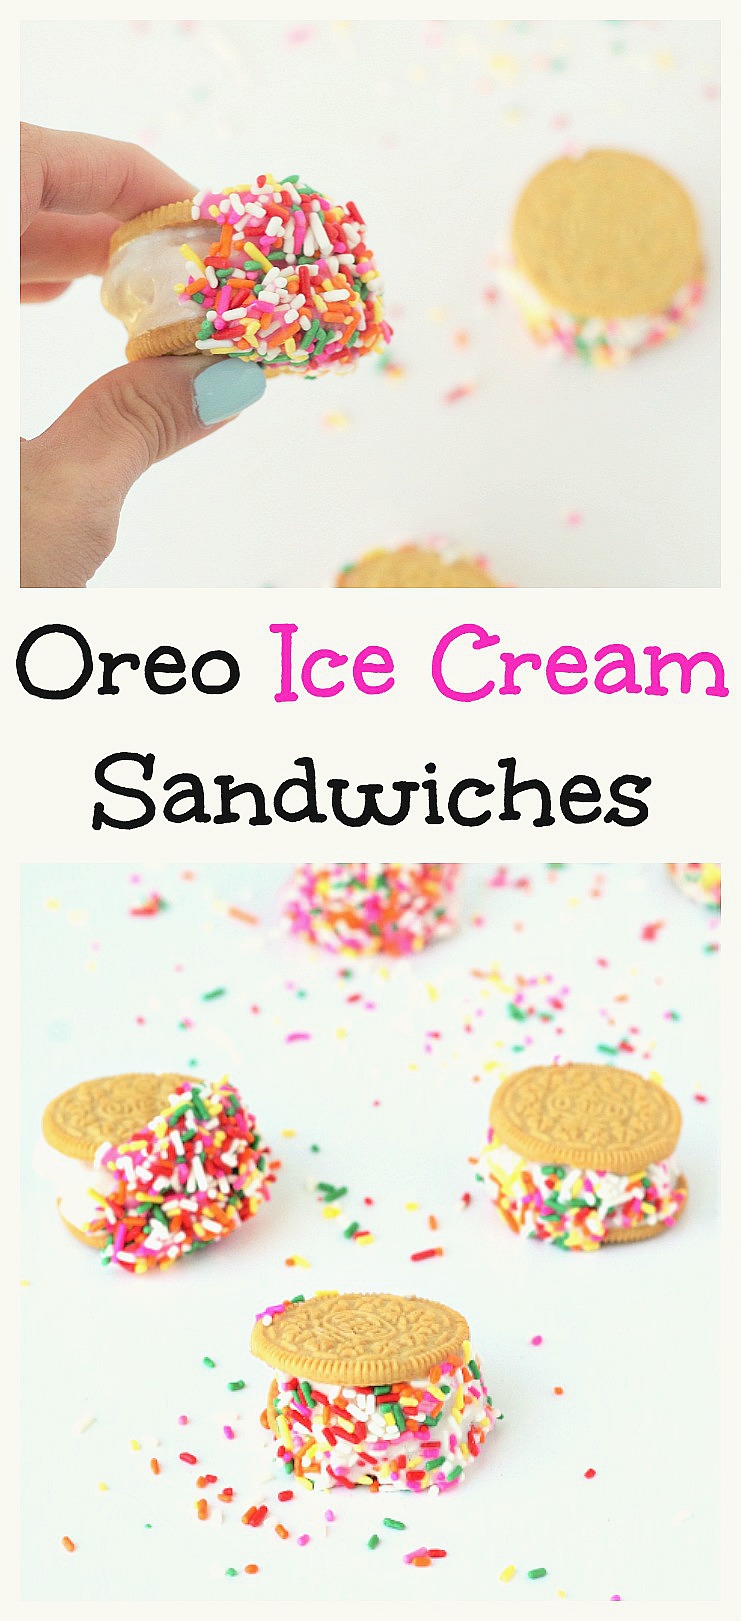 Oreo Icea Cream Sandwiches are the perfect little tasty crunchy cookie filled with creamy ice cream!